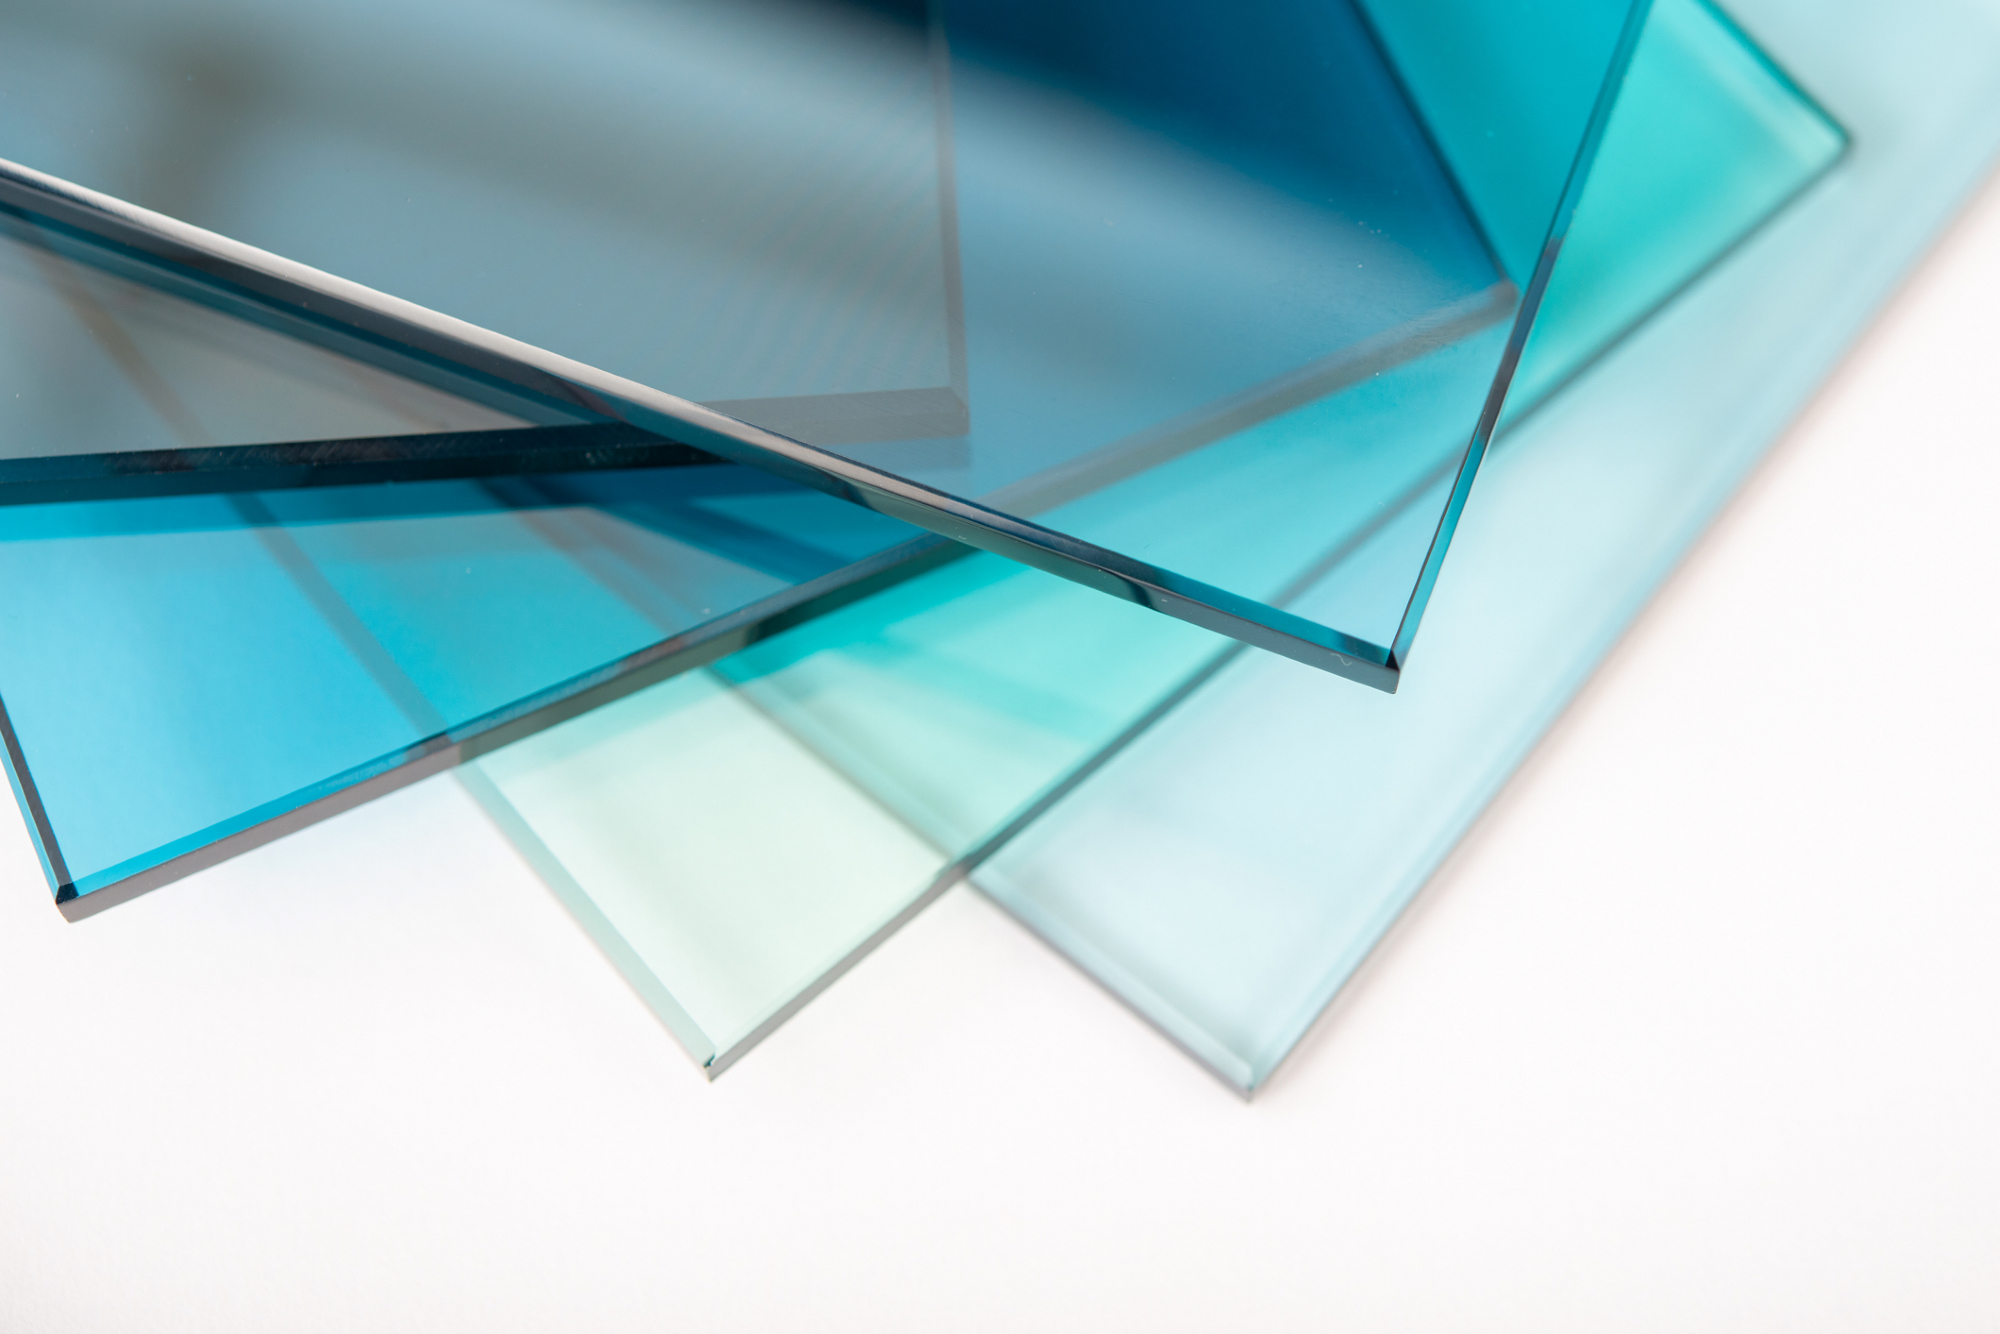 individual panes of glass in different colors stacked on top of each other